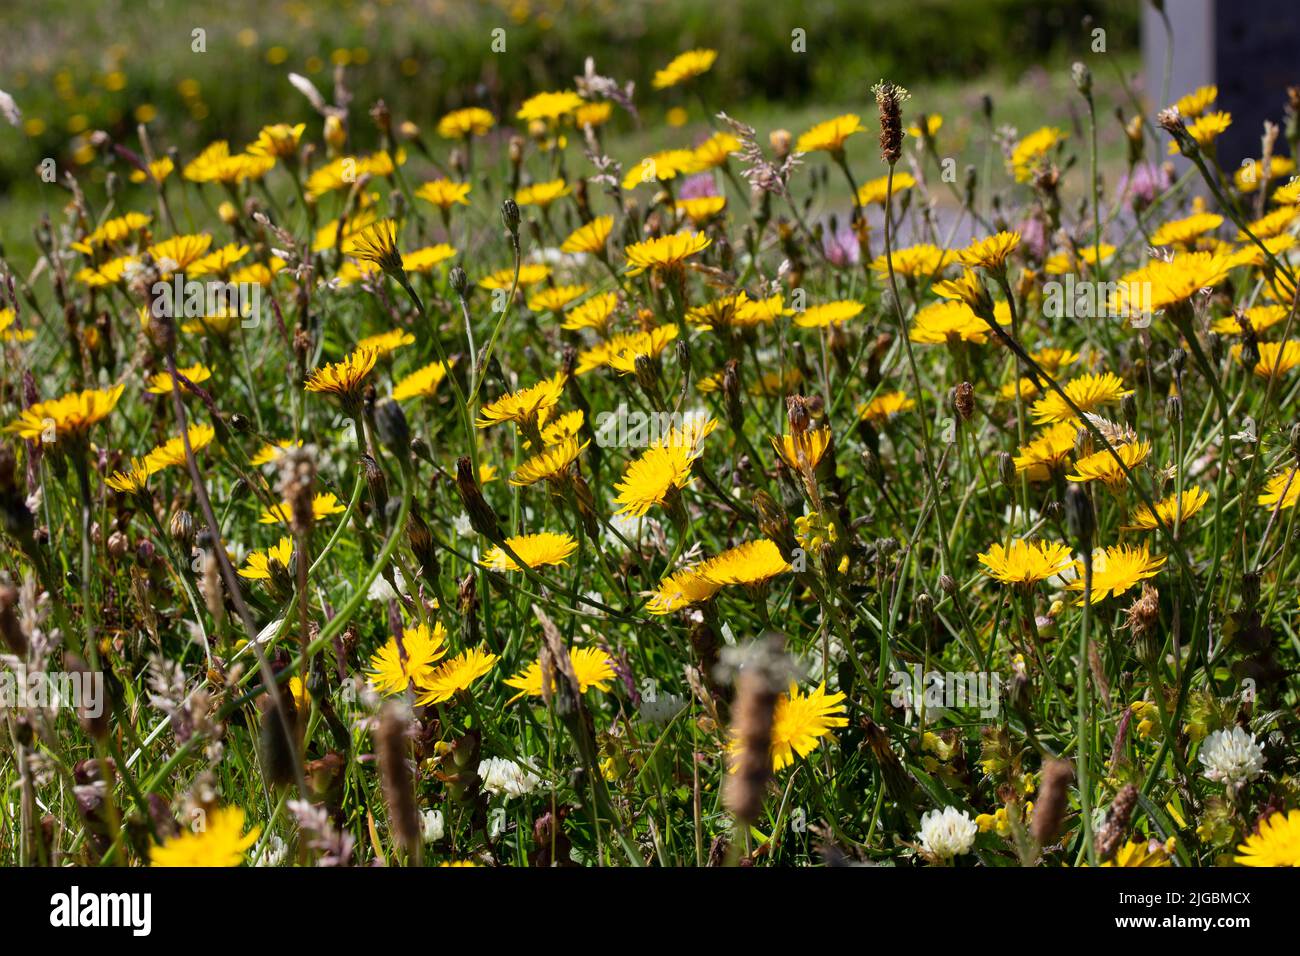 Dandelions in a hedge, County Kerry, Ireland Stock Photo